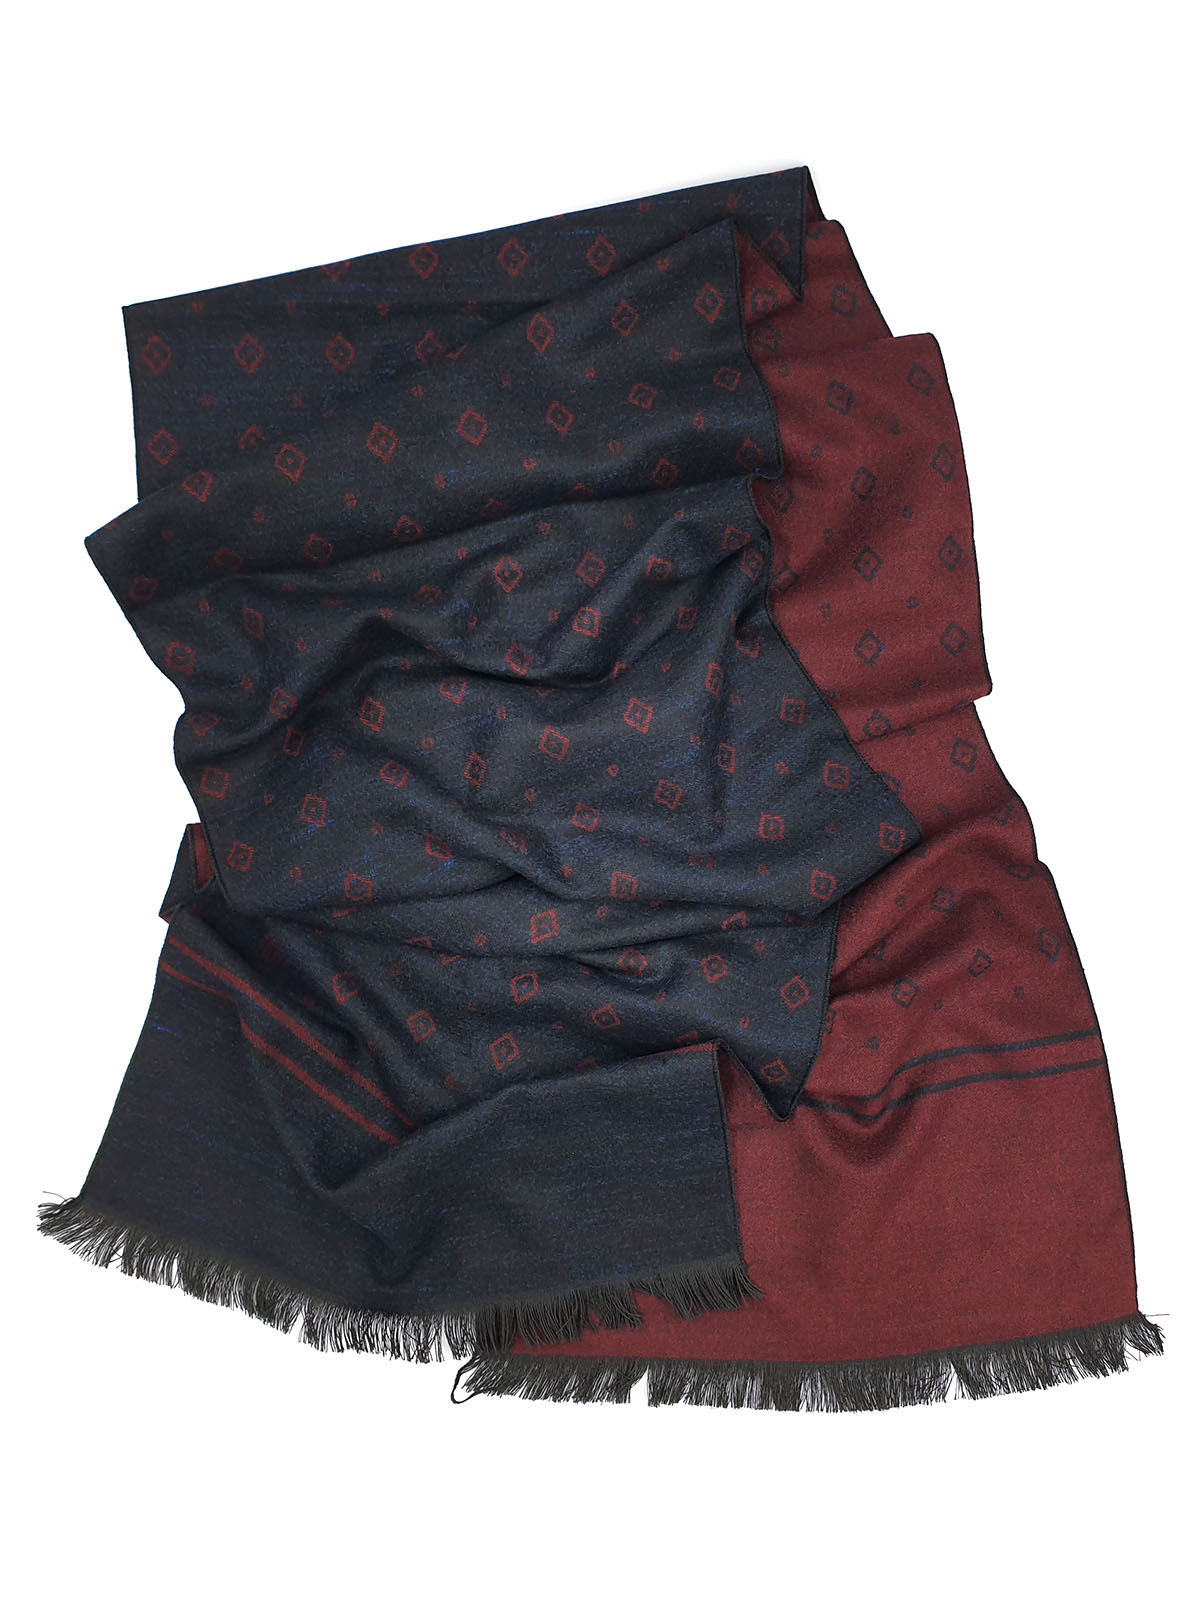 Doublesided scarf in burgundy and black - 10329 - € 19.68 img2